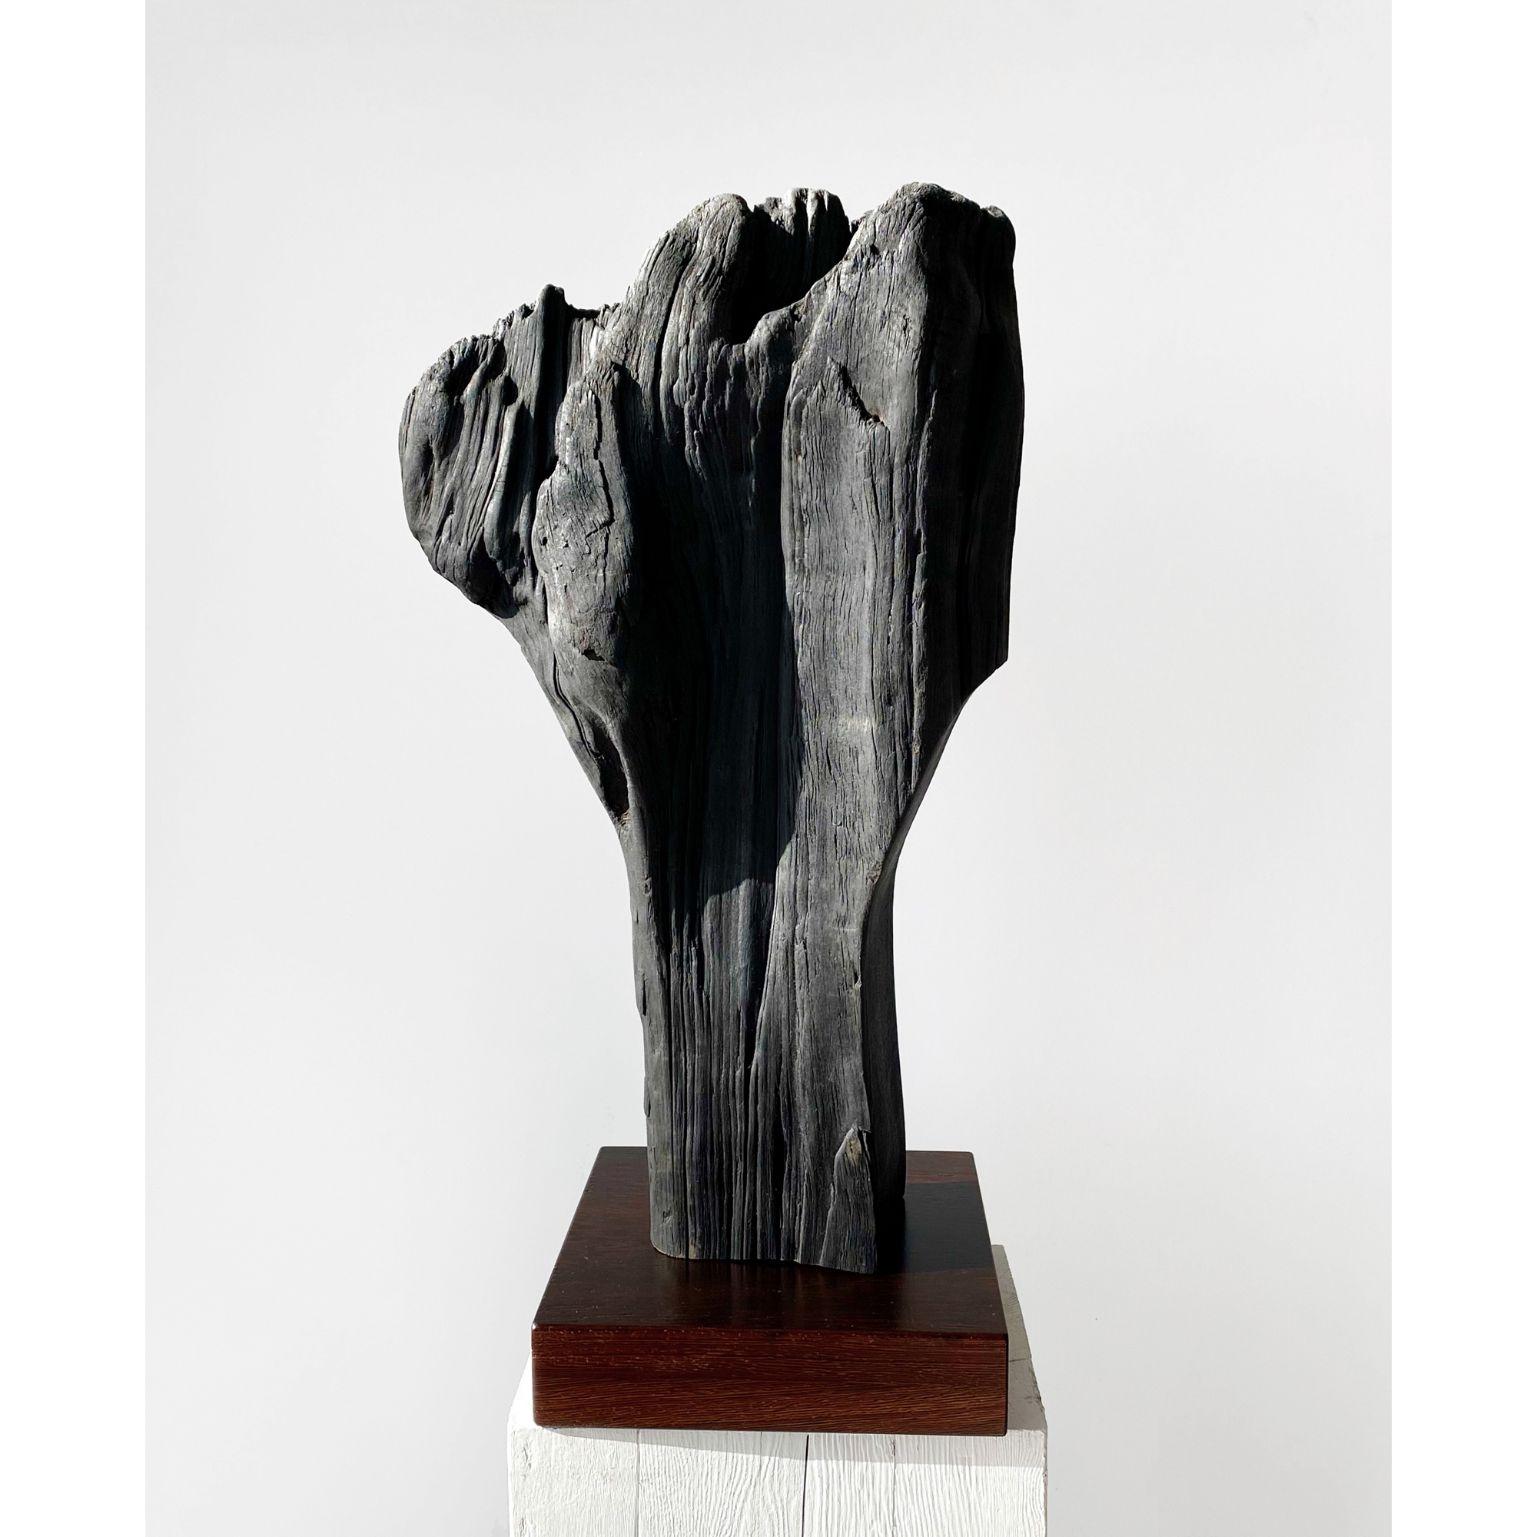 Untitled 37 by Neshka
Dimensions: 20 x 20 x 55 cm
Material: Charred cedar and wenge wood stand

Neshka ( Agnieszka Krusche ), is a native of Kraków, Poland, and a graduate of Alberta University of the Arts in Calgary, Canada.
Since graduating